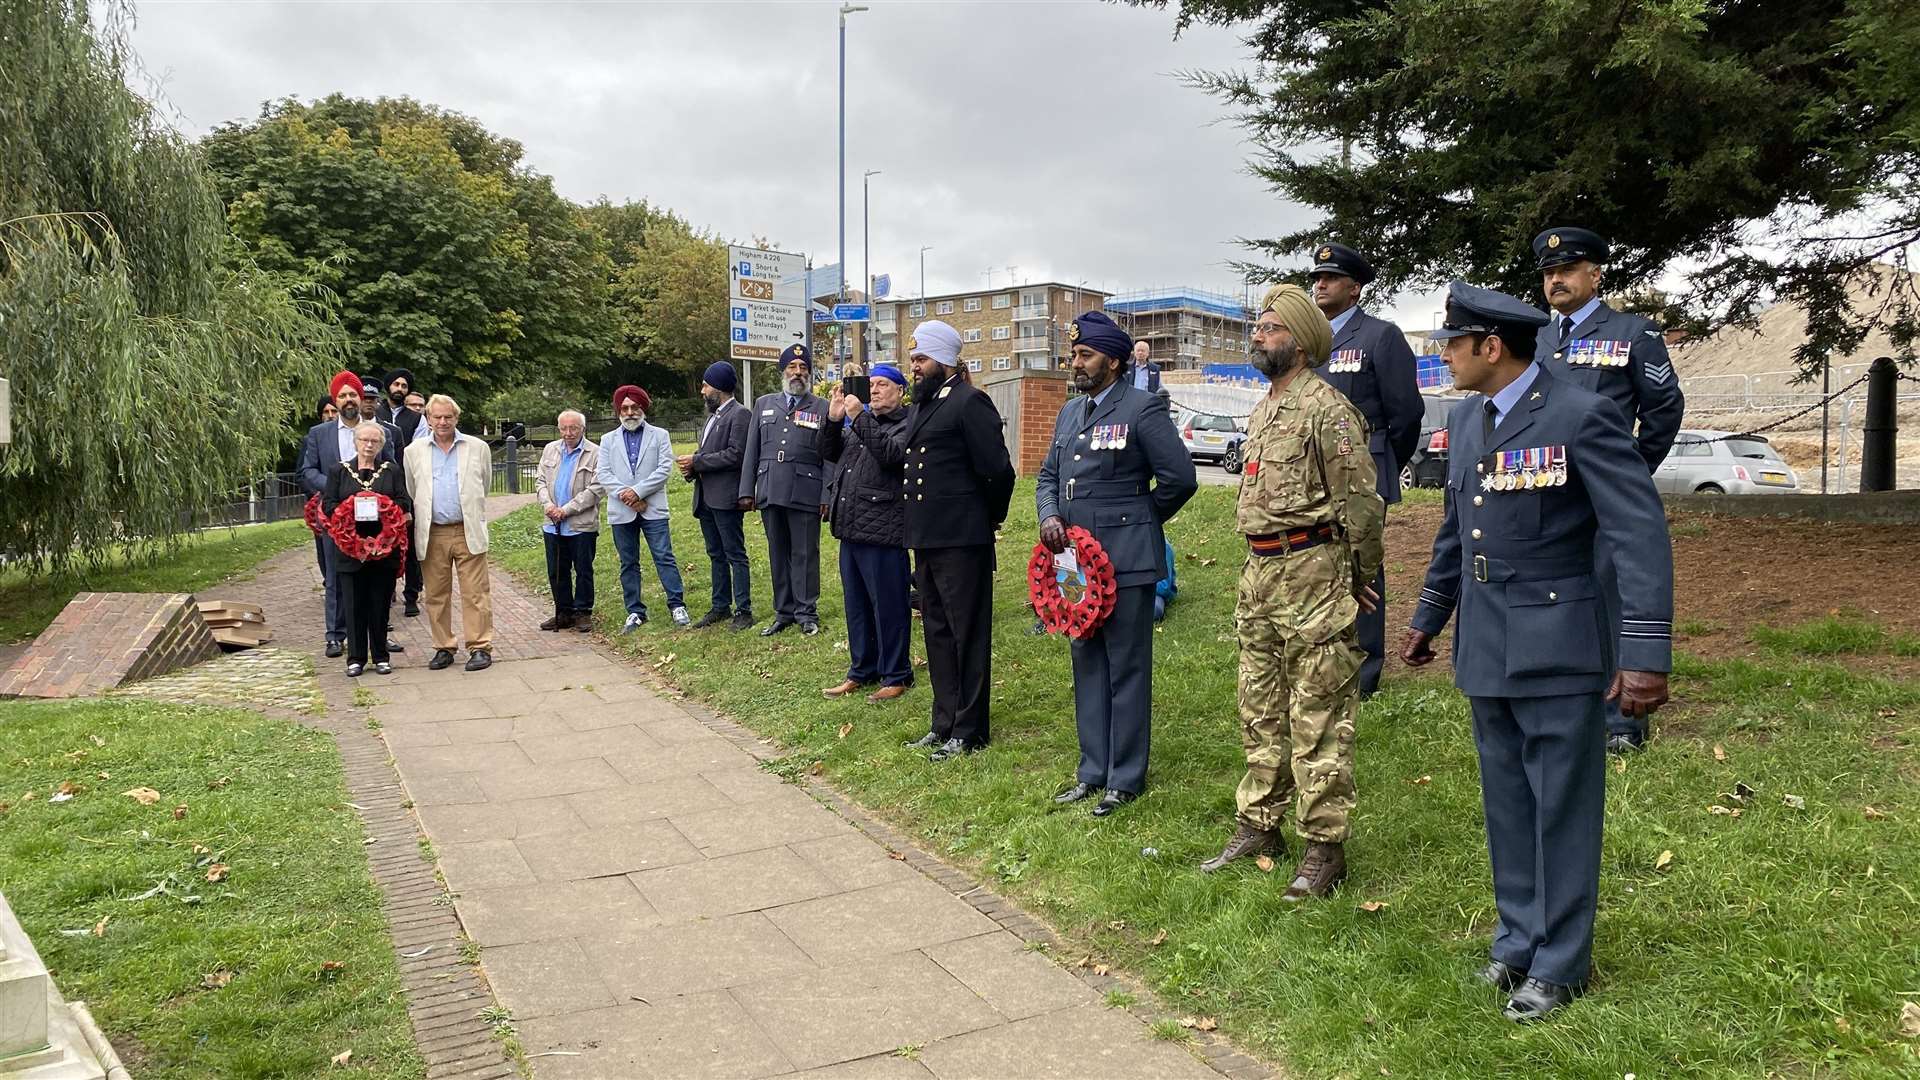 The service was attended by The Defence Sikh Network and members of the Sikh community. Picture: Jagdev Singh Virdee